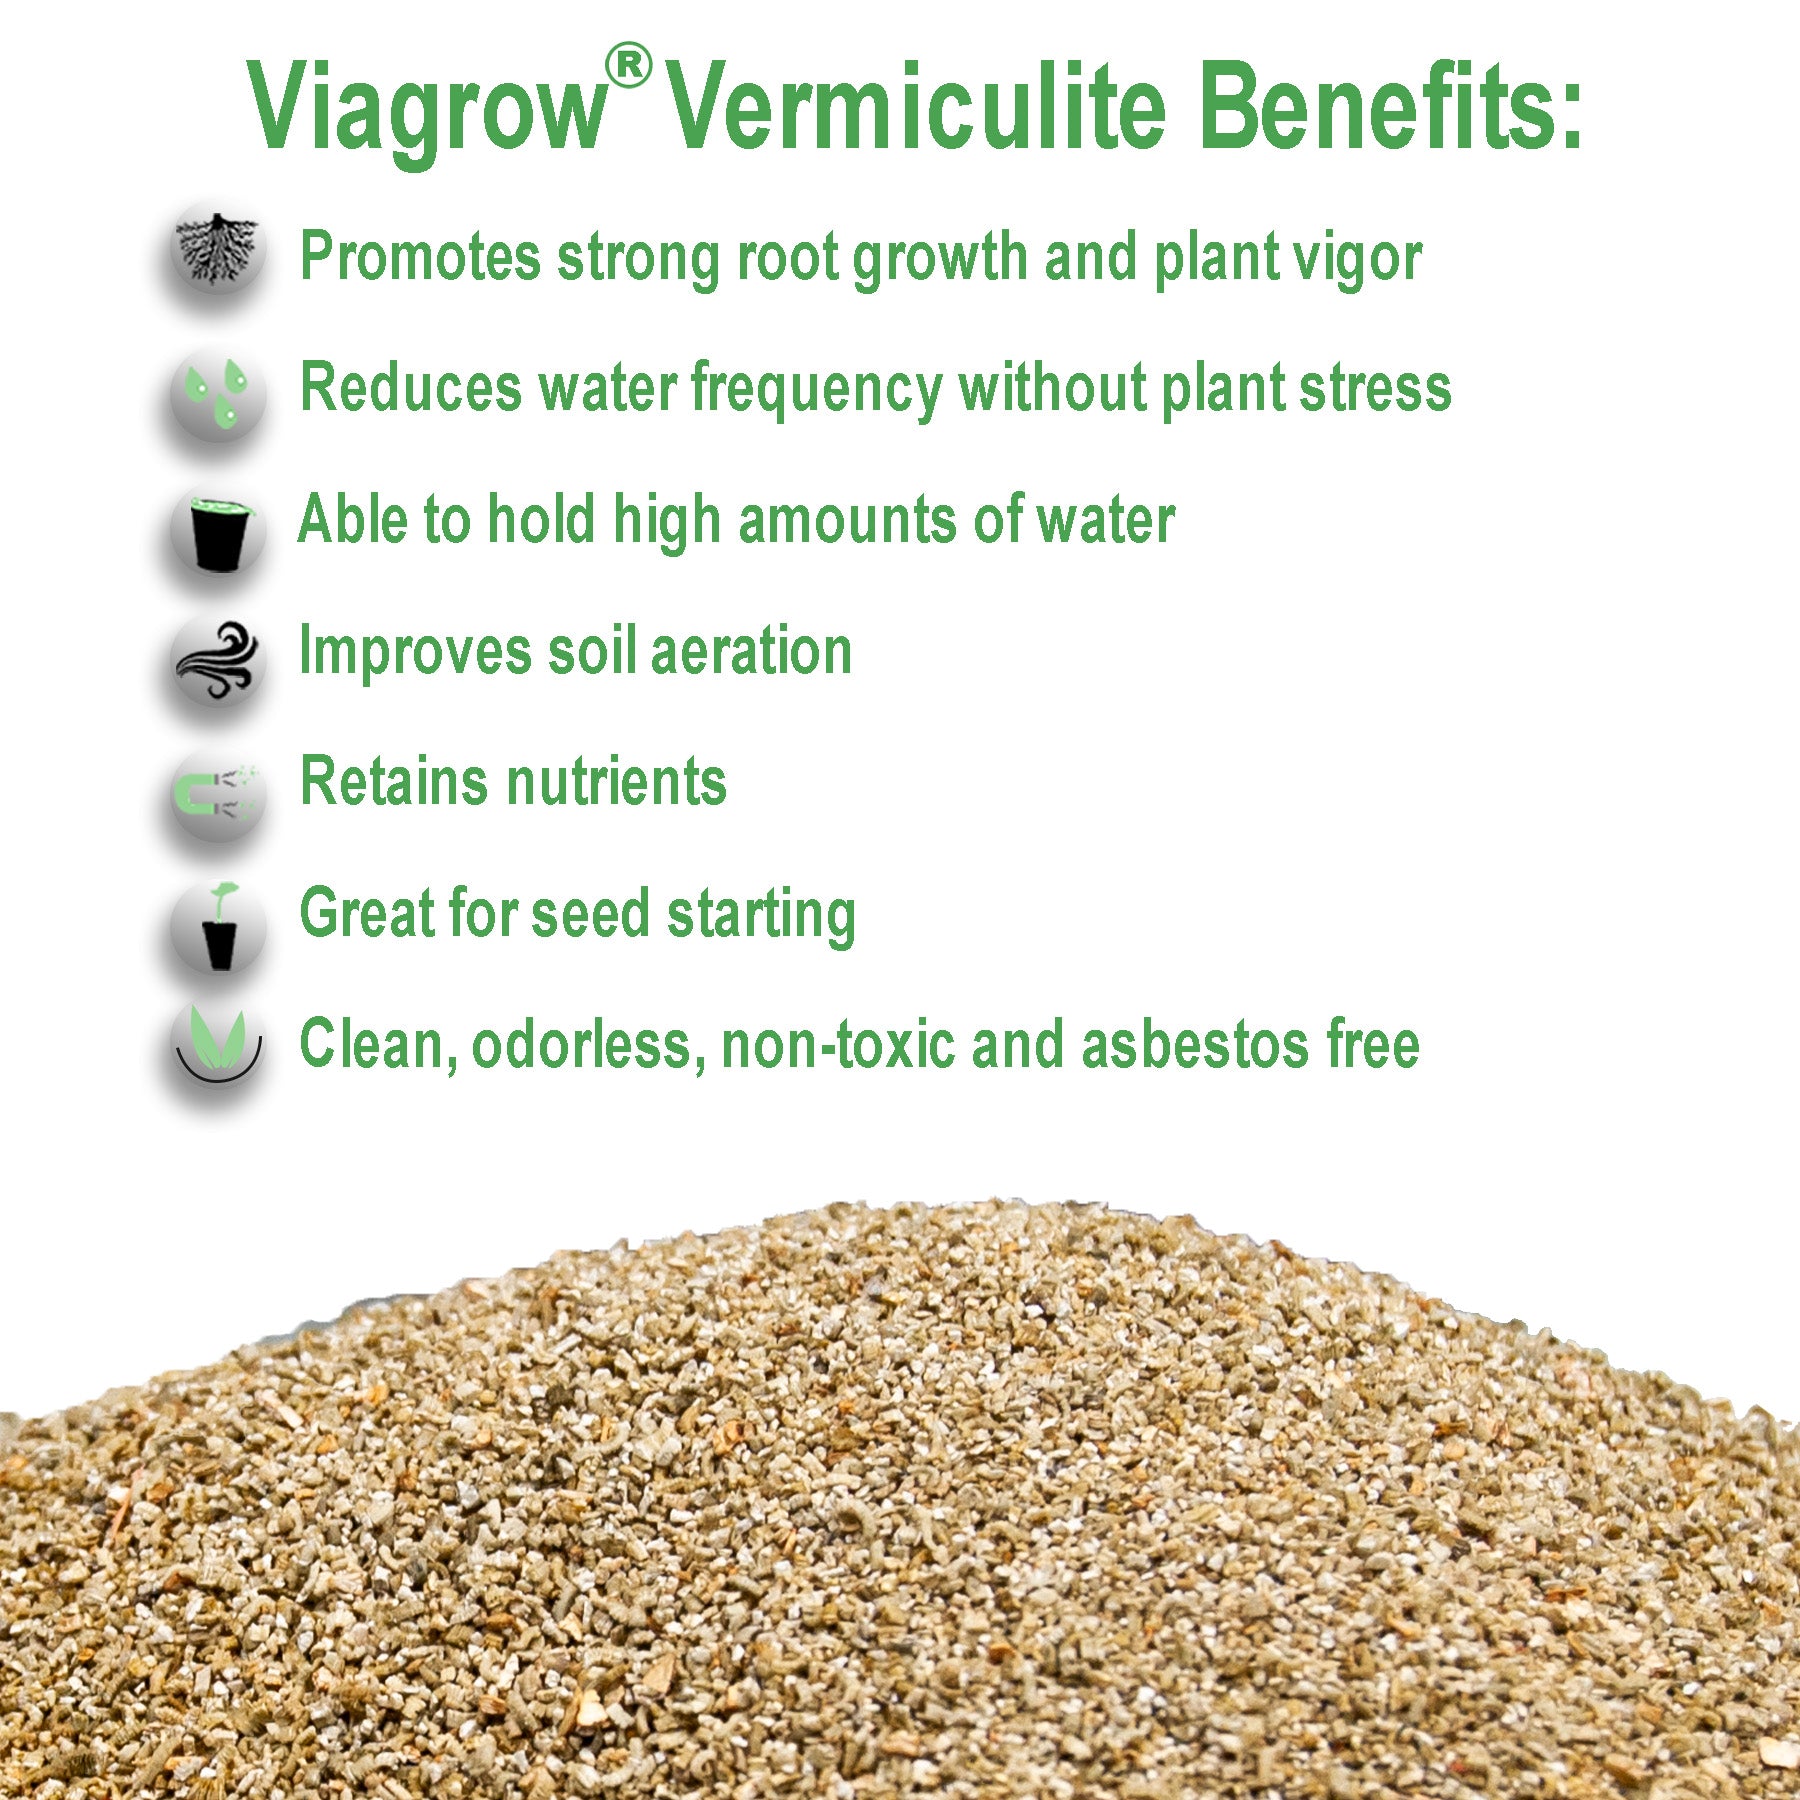 Viagrow Horticultural Vermiculite, 29.9 Quarts / 1 cubic FT / 7.5 gallons / 28.25 liters